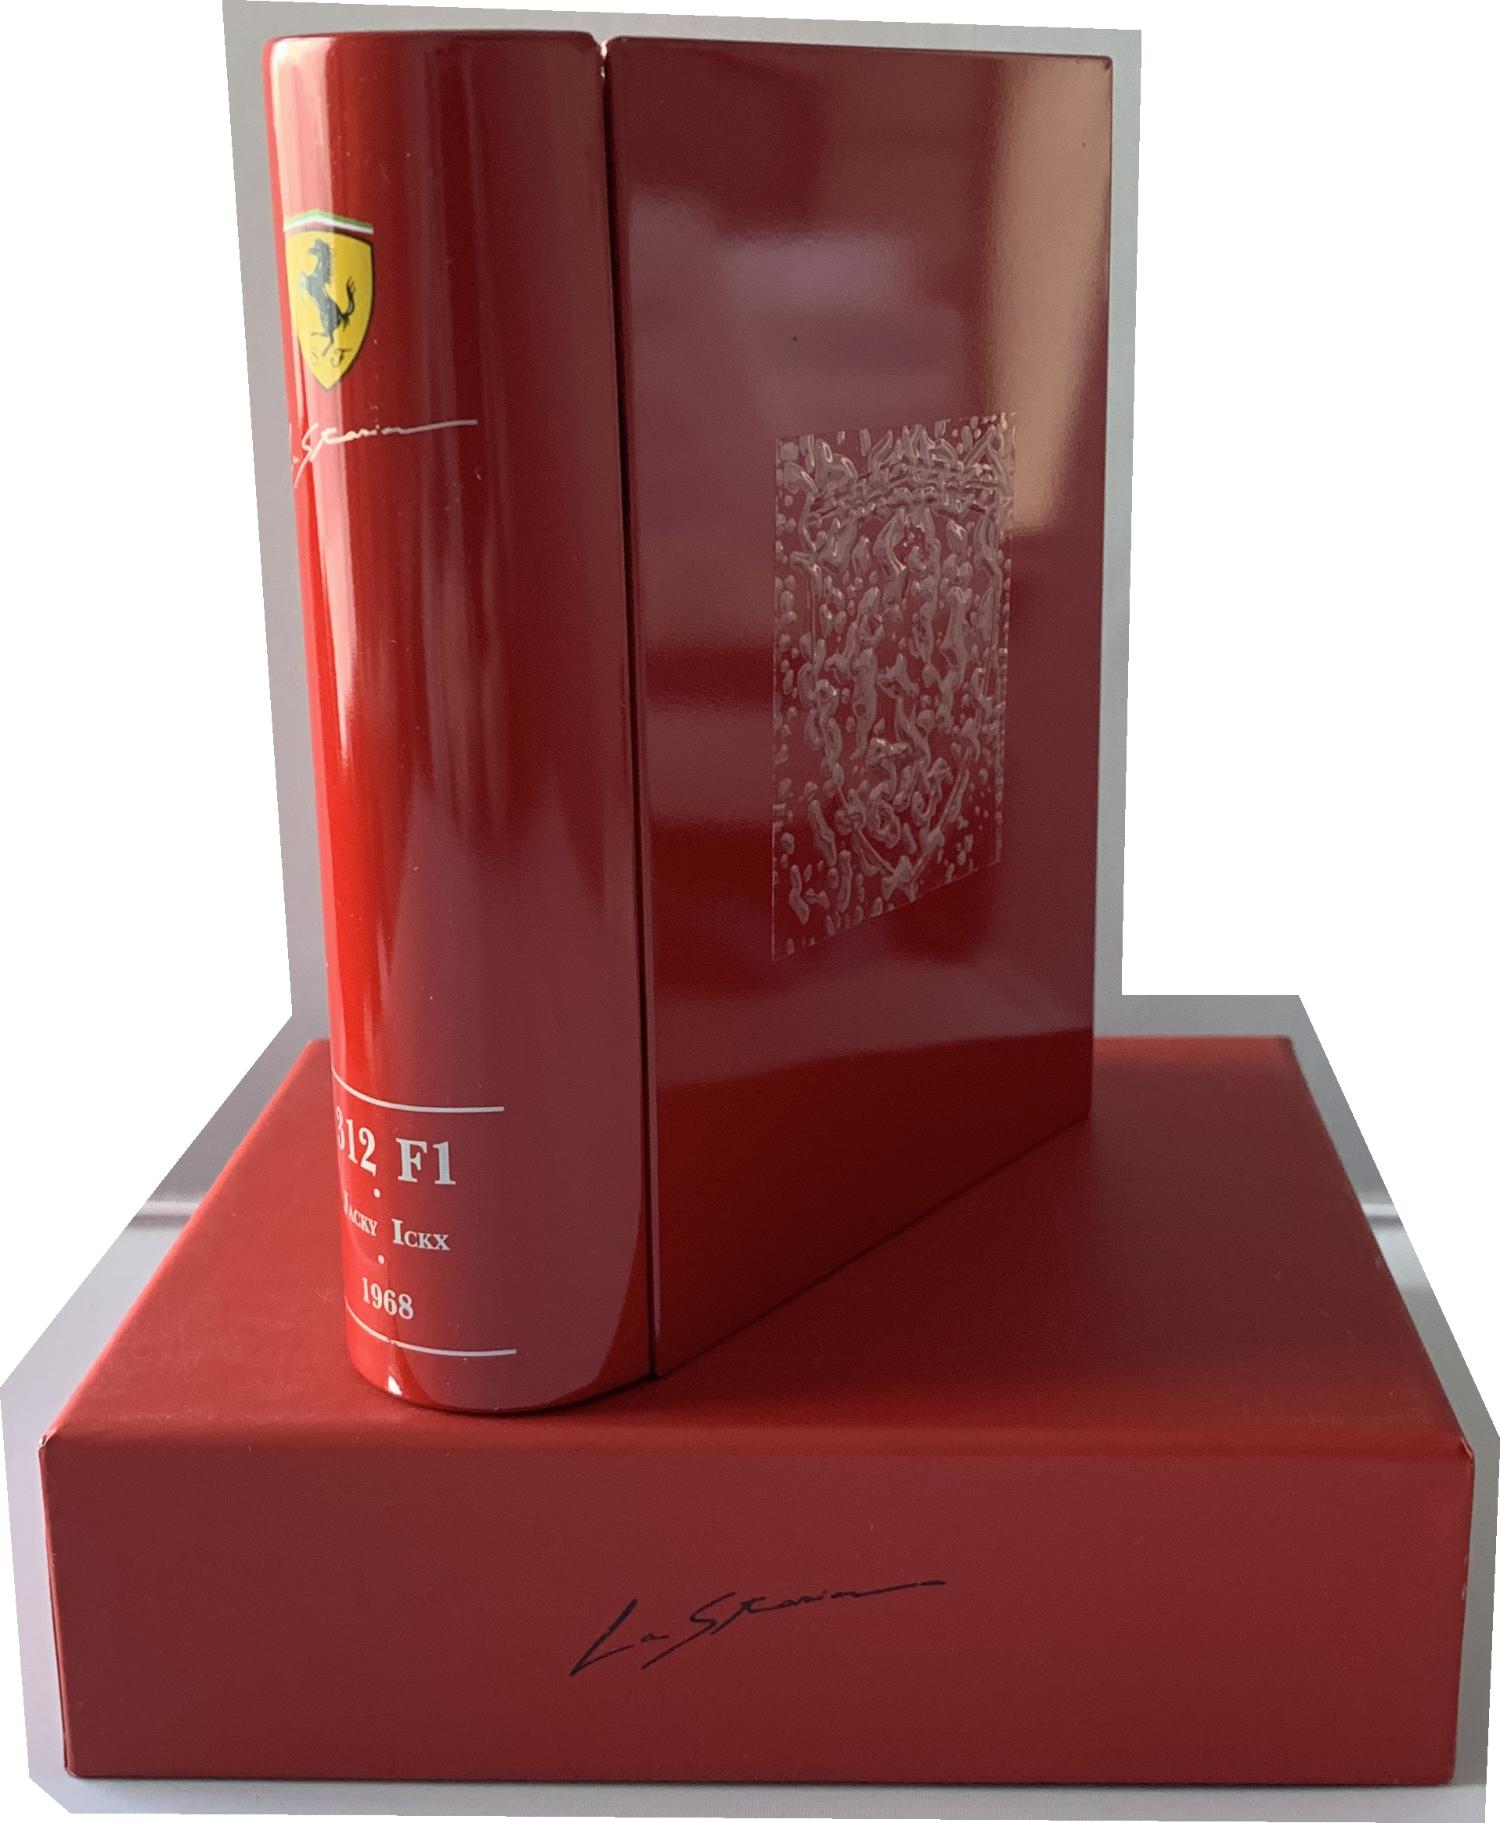 "La Storia" is IXO's celebration of an officially licensed product, which is presented in its own custom labeled metal, book-shaped box complete with booklet detailing the car's history and specifications